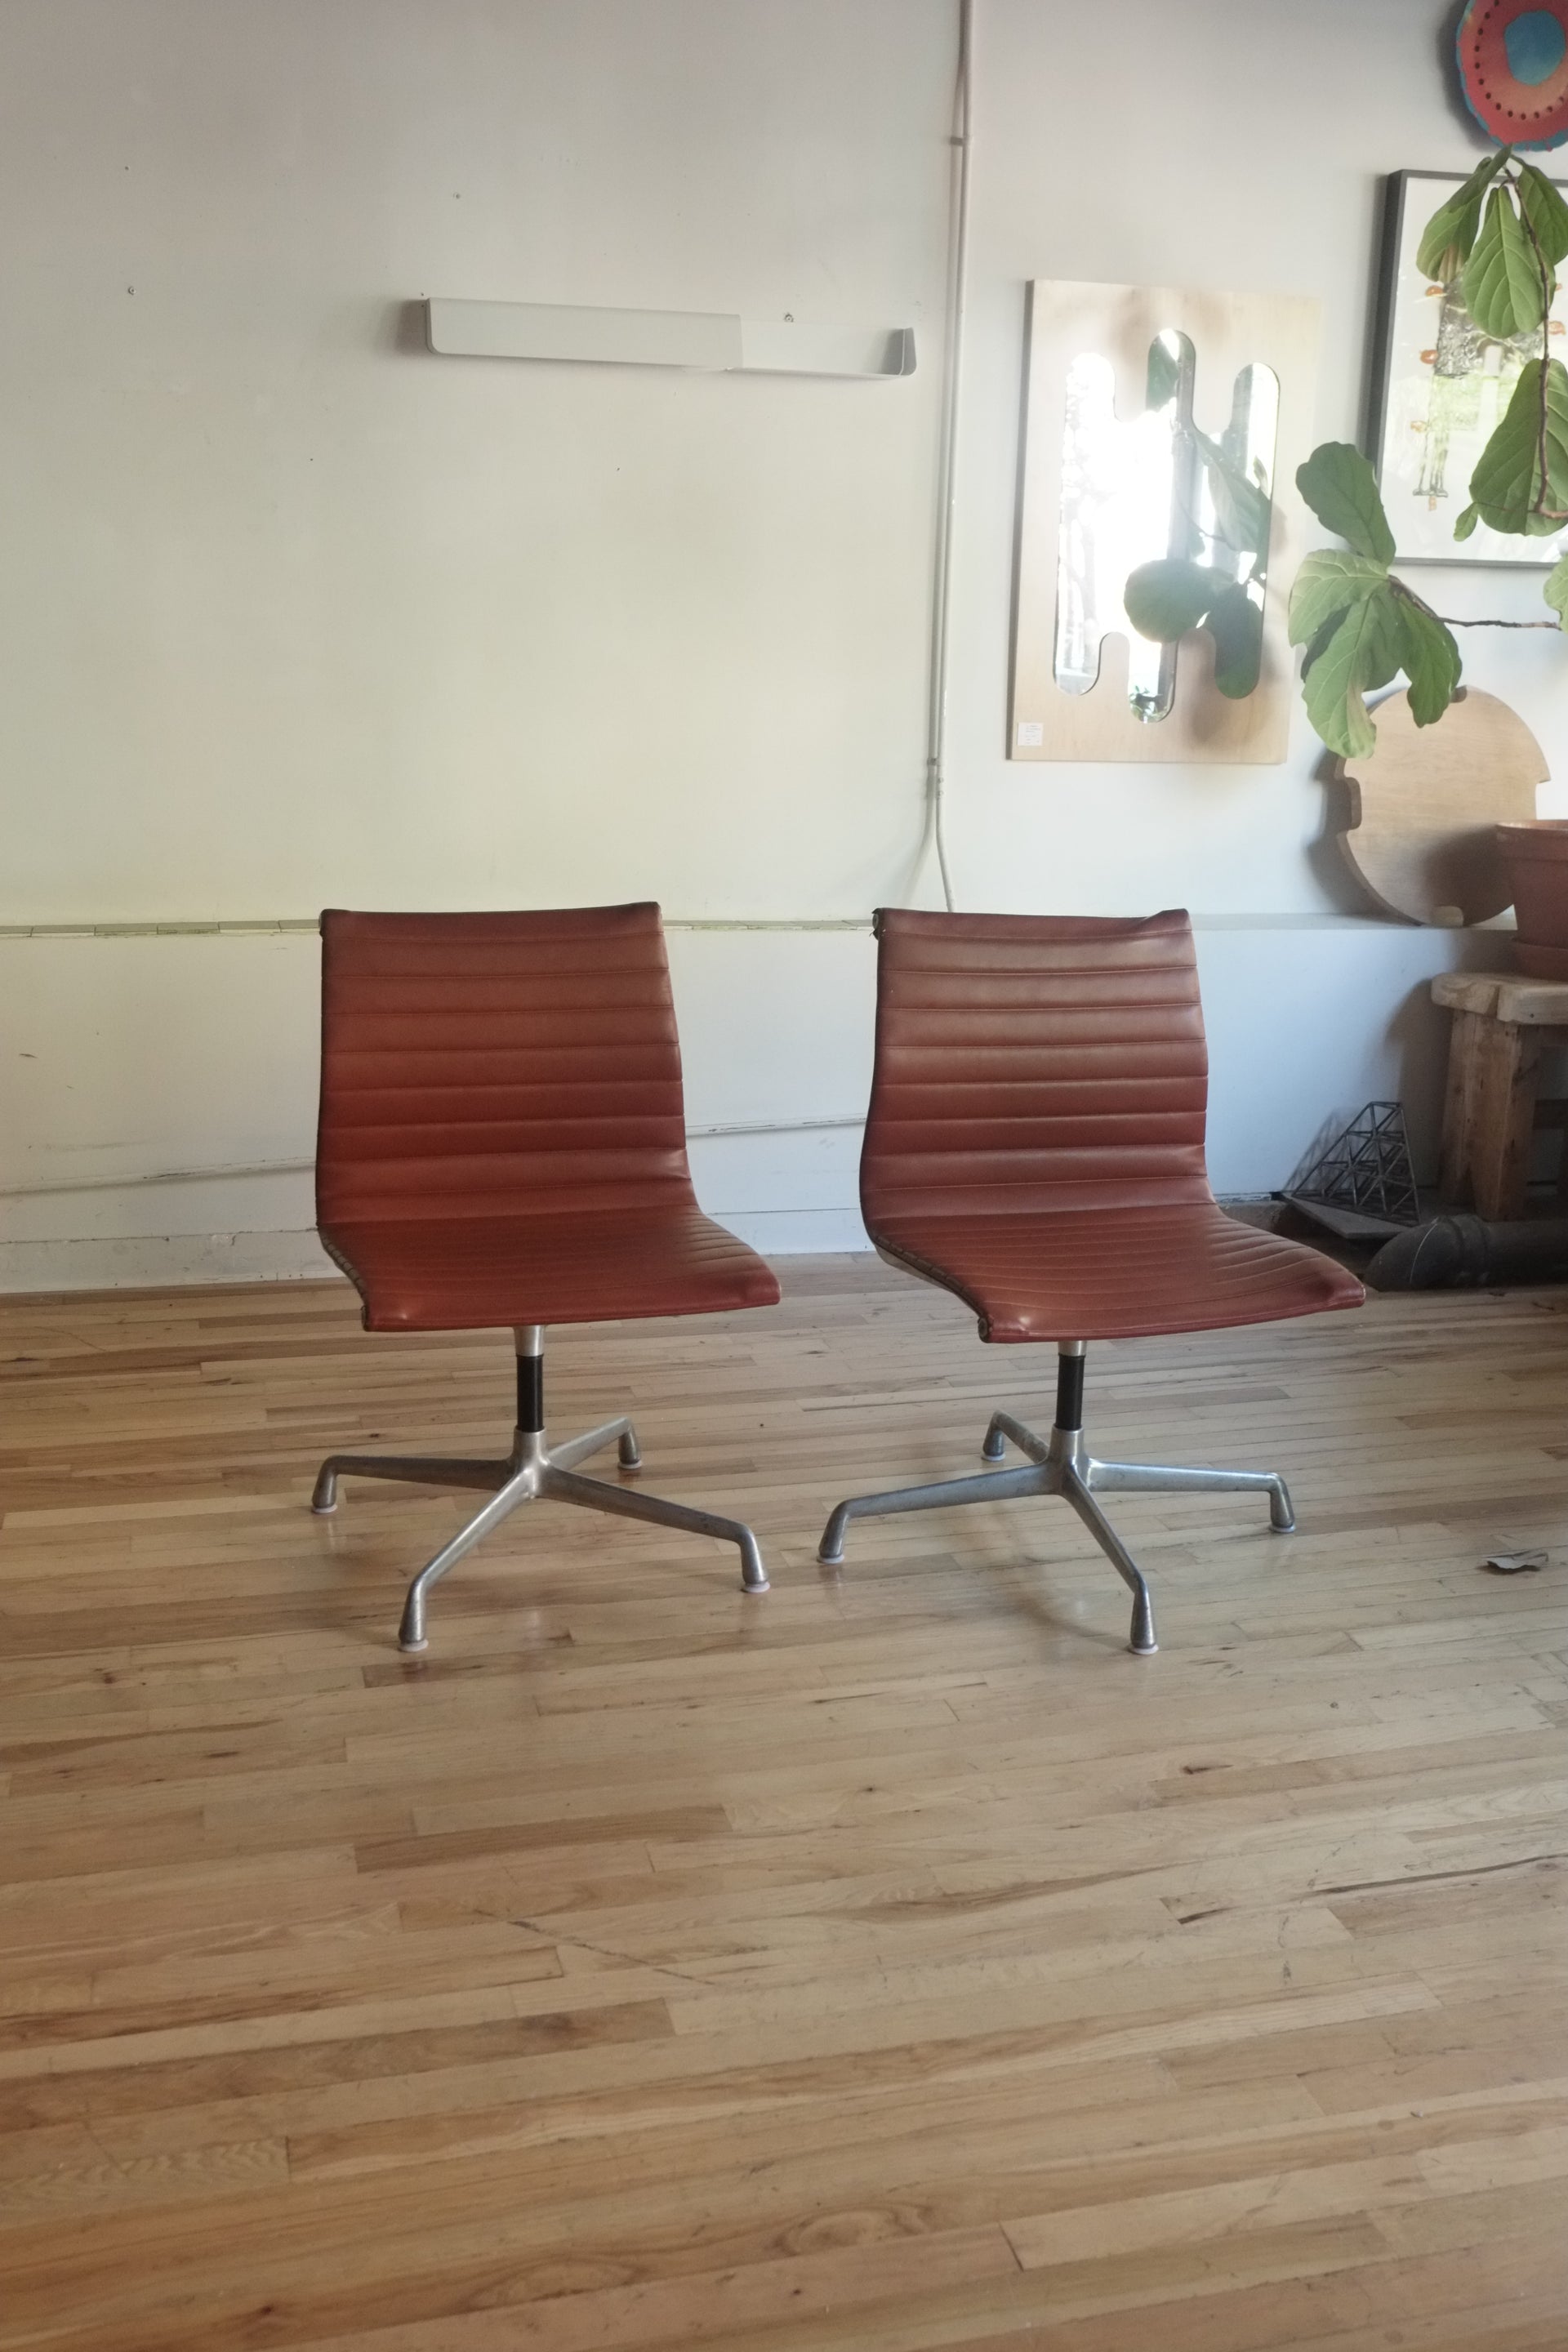 EAMES ALUMINUM GROUP MANAGEMENT CHAIRs (Burgundy Leather)